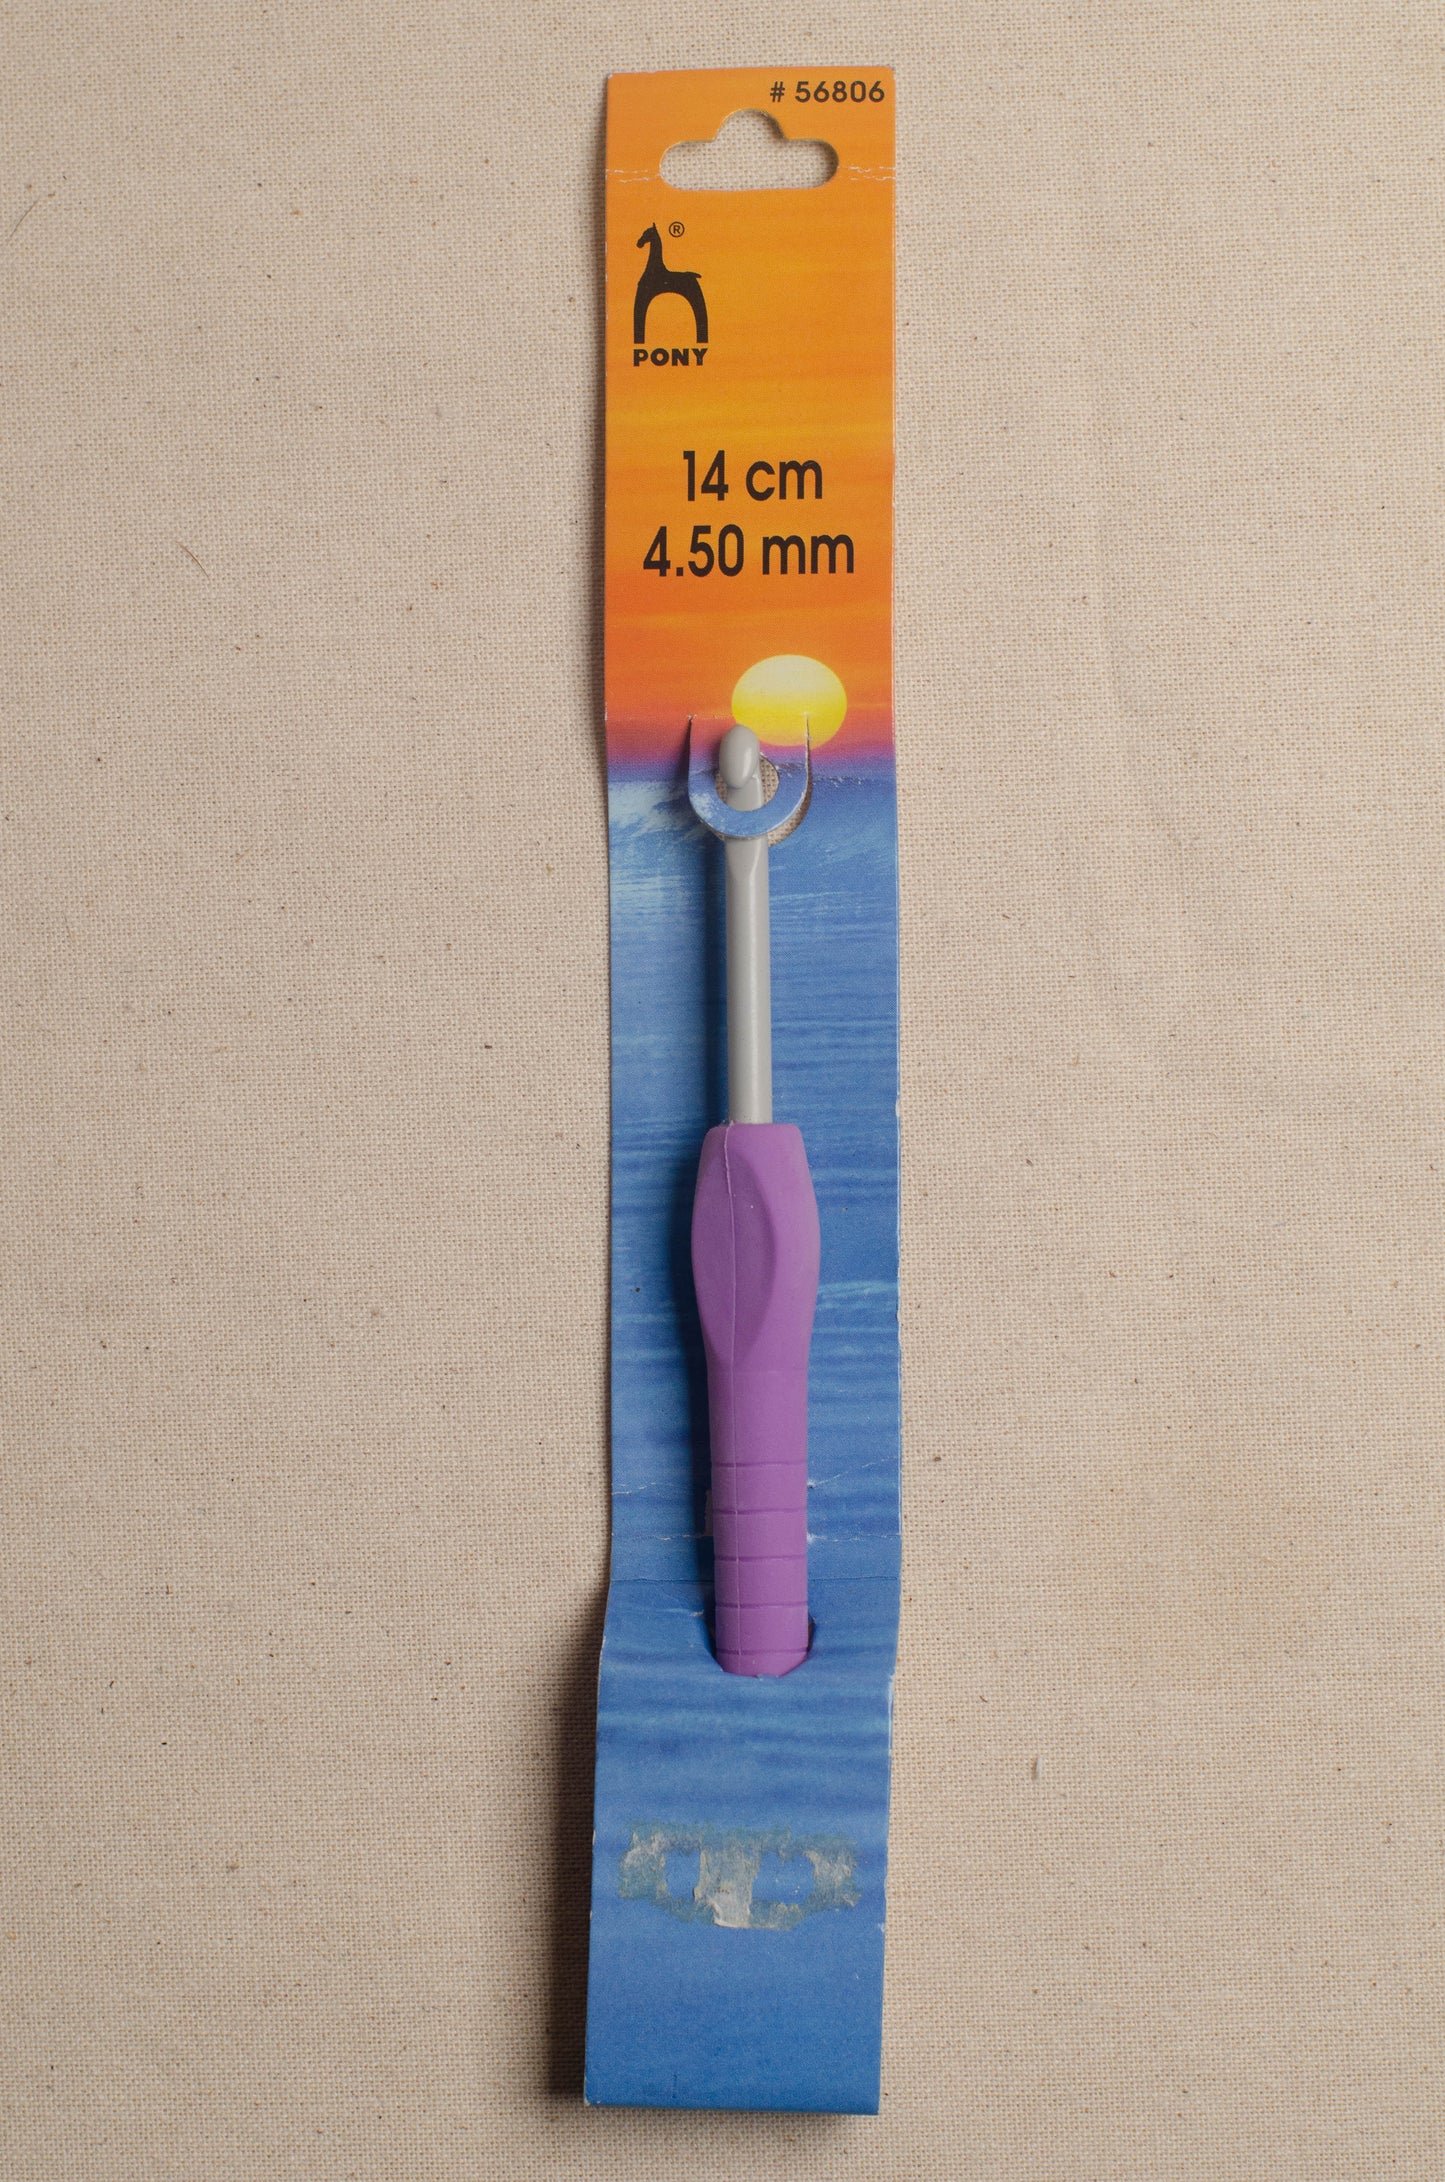 4.5 mm Pony Easy Grip Crochet Hook with Flat Finger/Thumb Rest